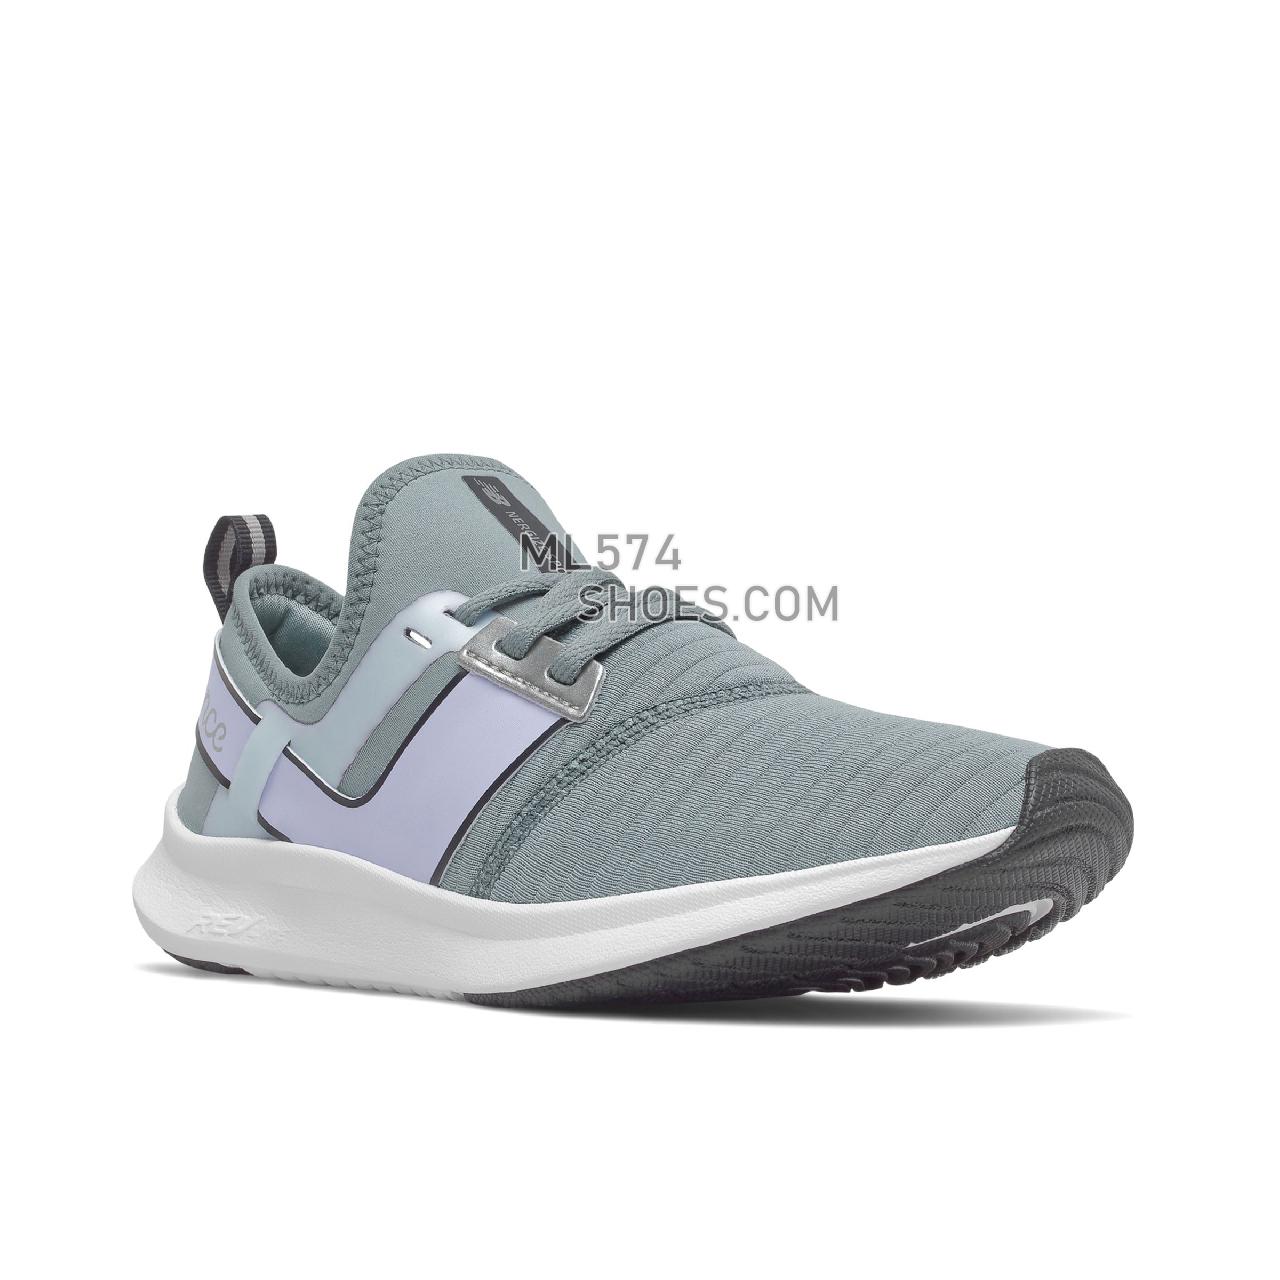 New Balance NB Nergize Sport - Women's Sport Style Sneakers - Slate with Whisper Grey - WNRGSWR1